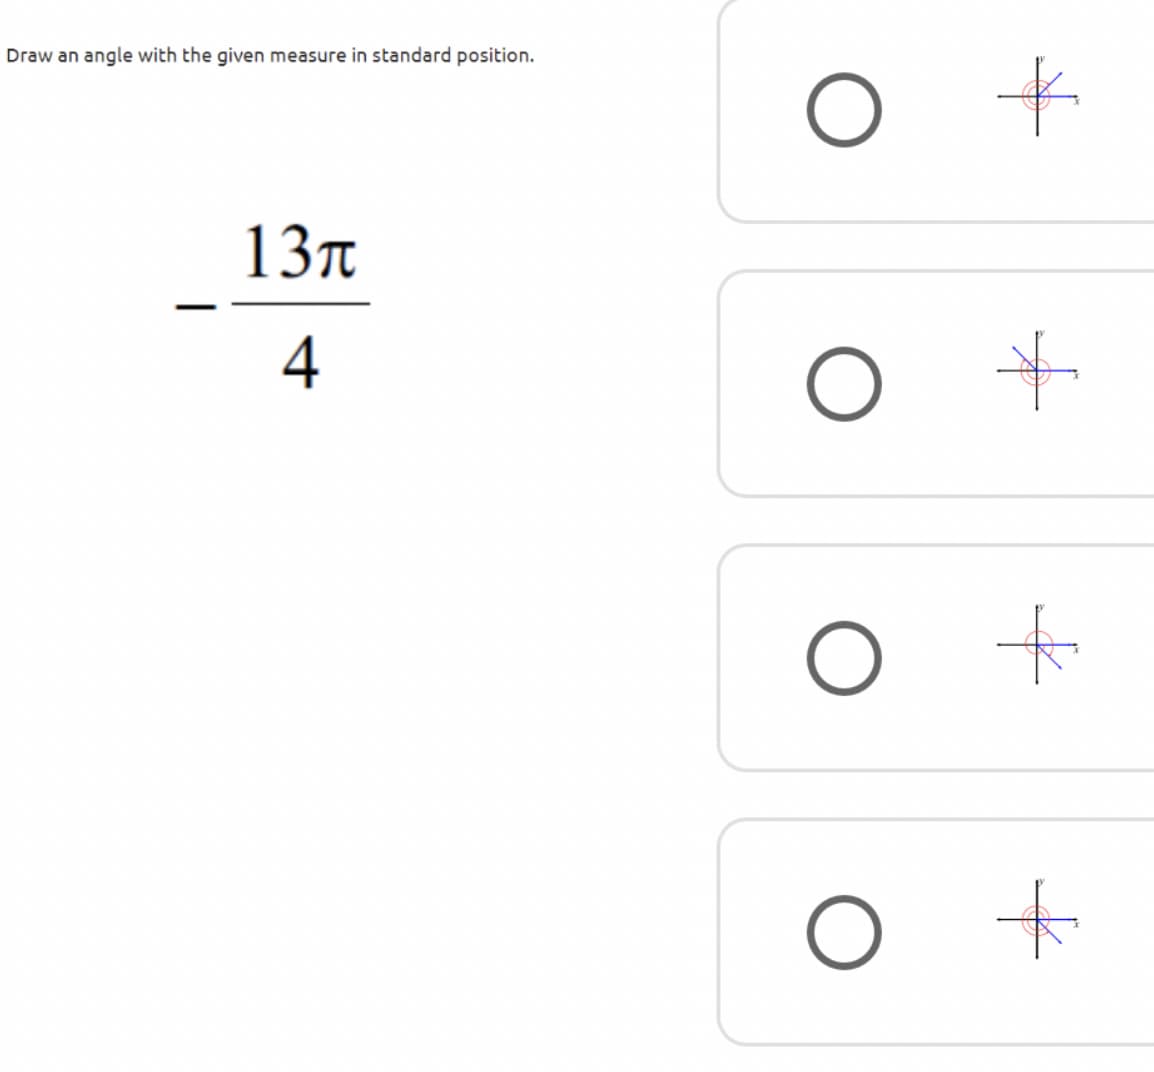 Draw an angle with the given measure in standard position.
to
13n
4
to
